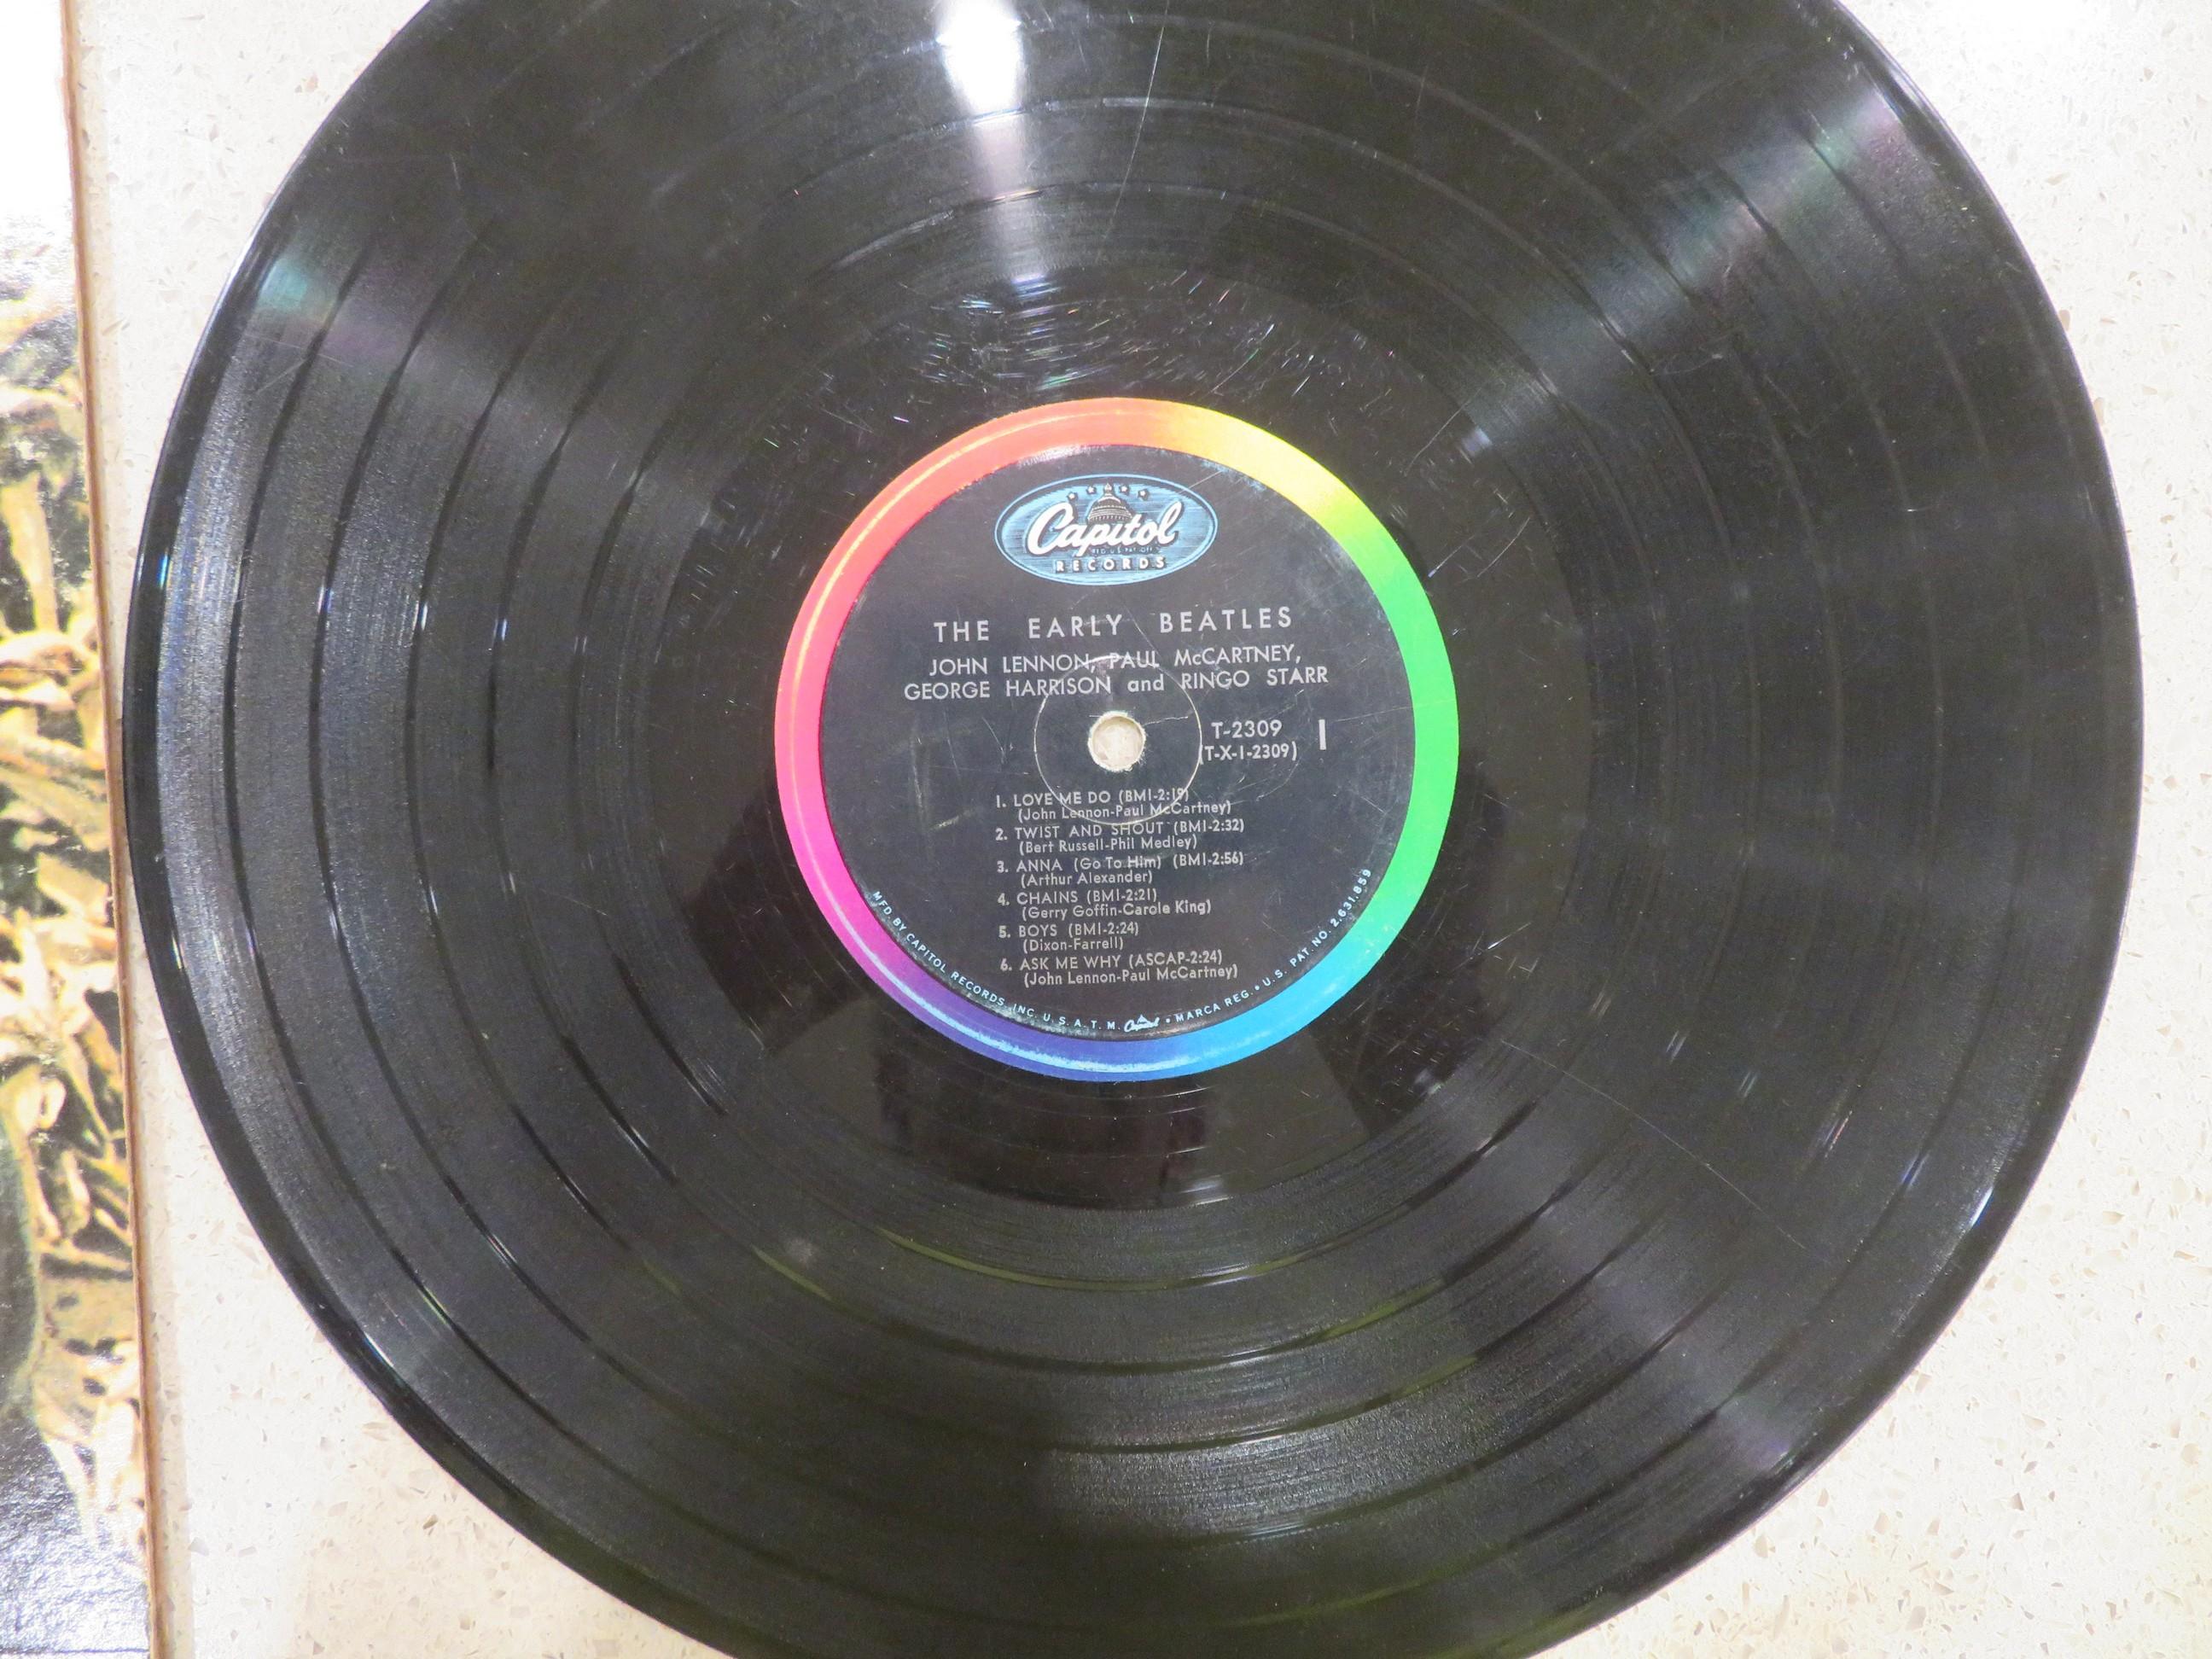 vintage Beatles 33rpm record, "The Early Beatles", Capitol, T 2309, etched T1-2309 P3 G; 3 very mino